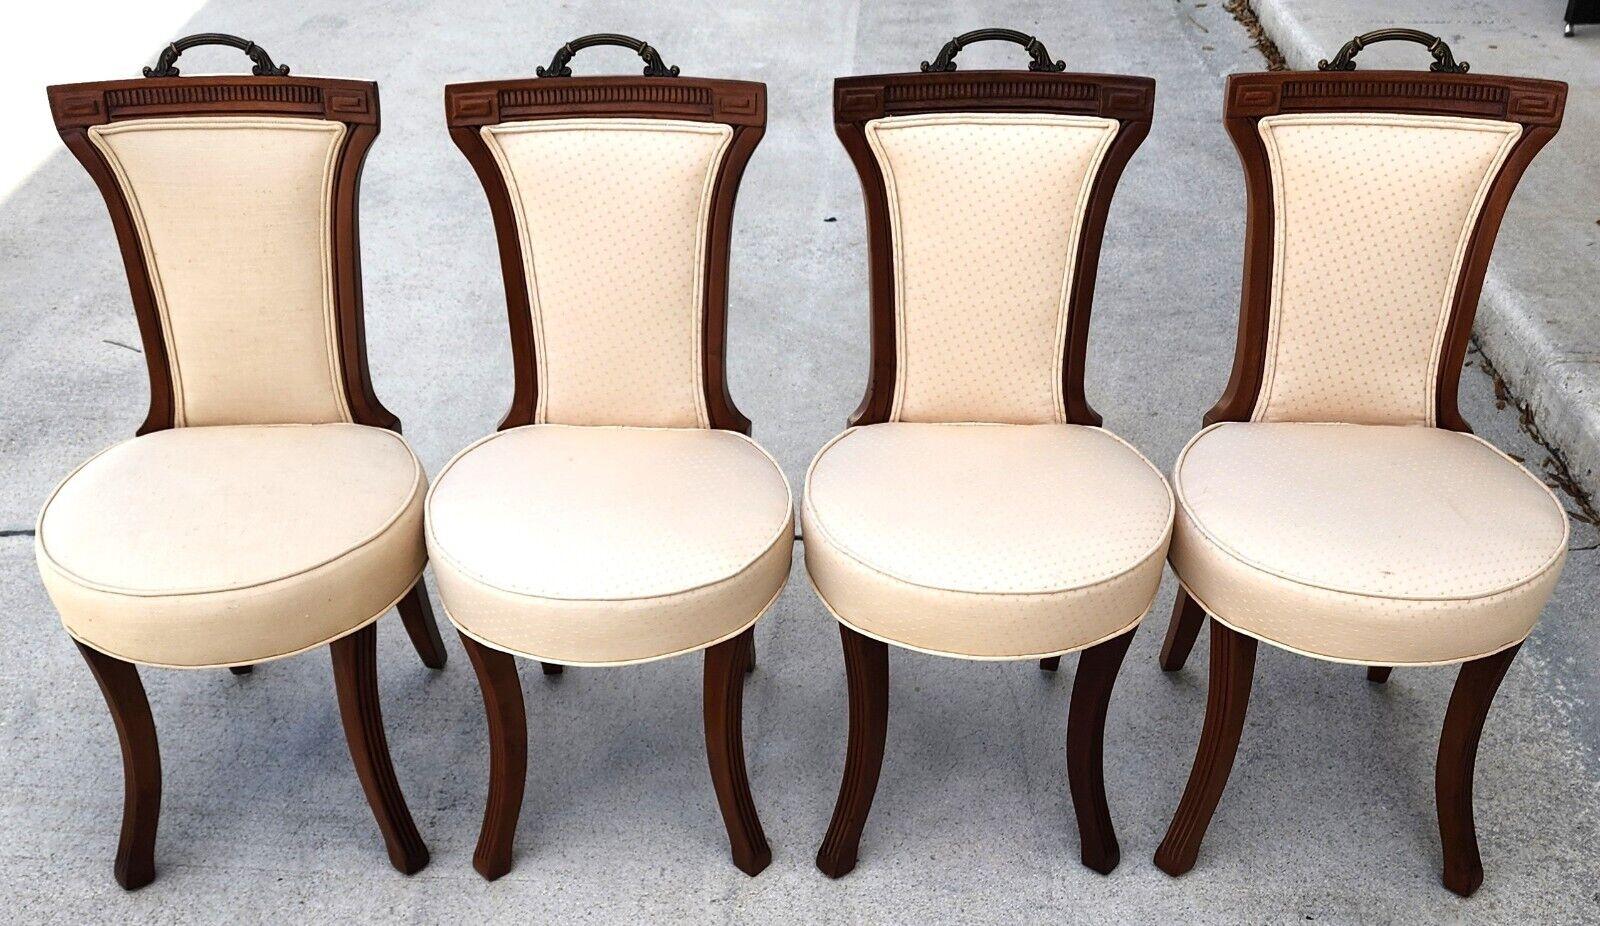 For FULL item description click on CONTINUE READING at the bottom of this page.

Offering One Of Our Recent Palm Beach Estate Fine Furniture Acquisitions Of A
Set of 4 Antique Dining Chairs with Brass handles for moving.

Note: 1 chair has a